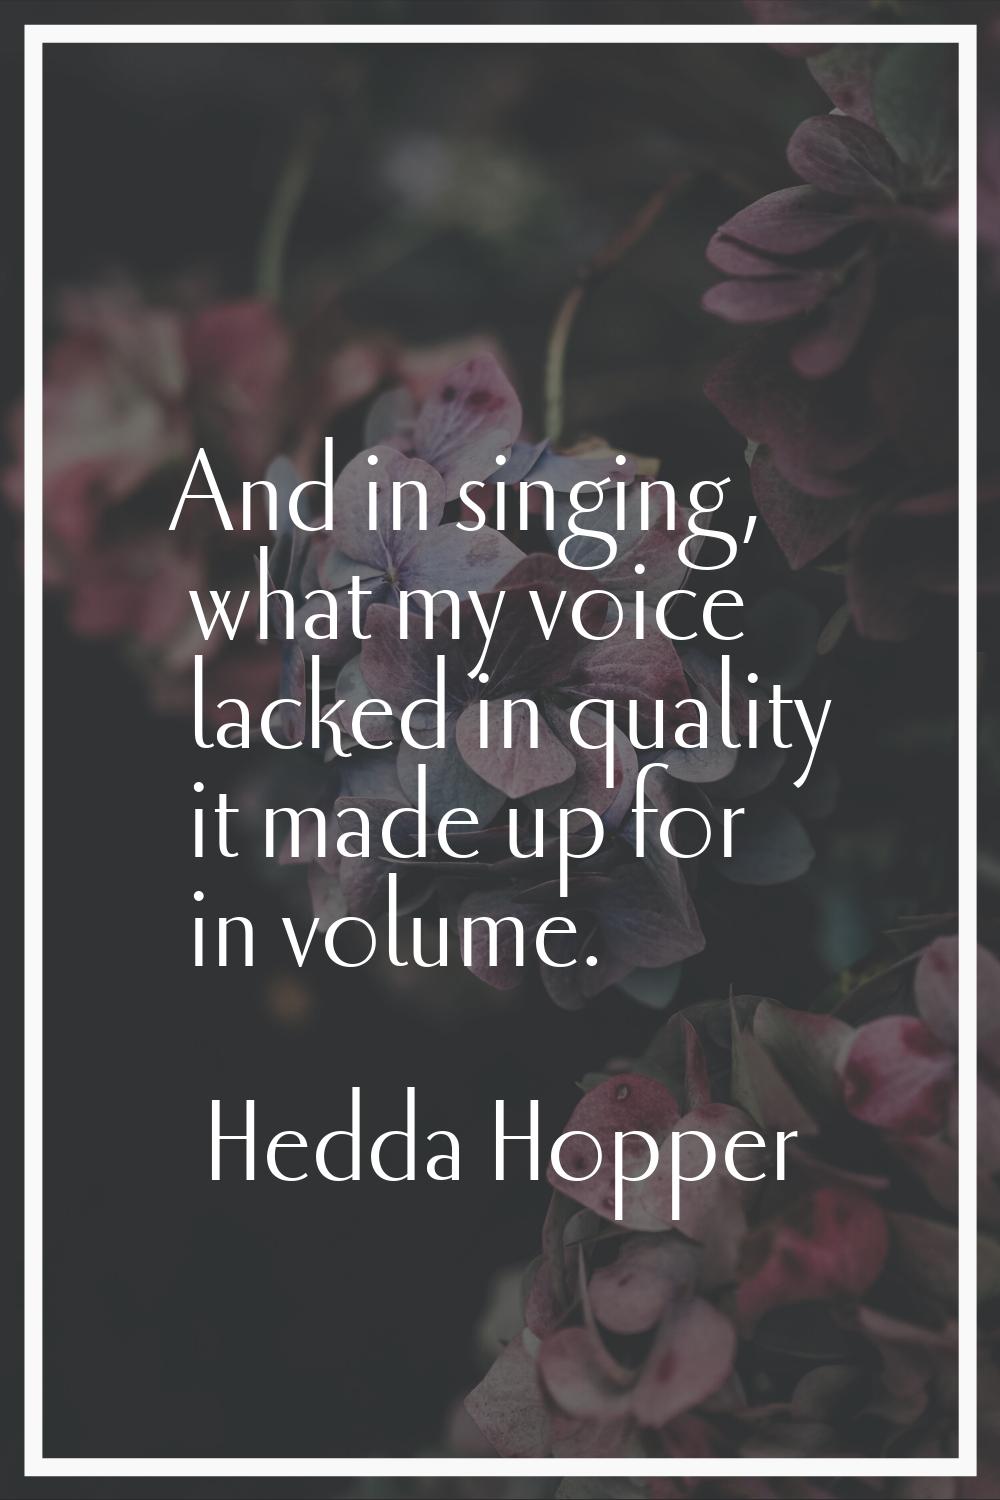 And in singing, what my voice lacked in quality it made up for in volume.